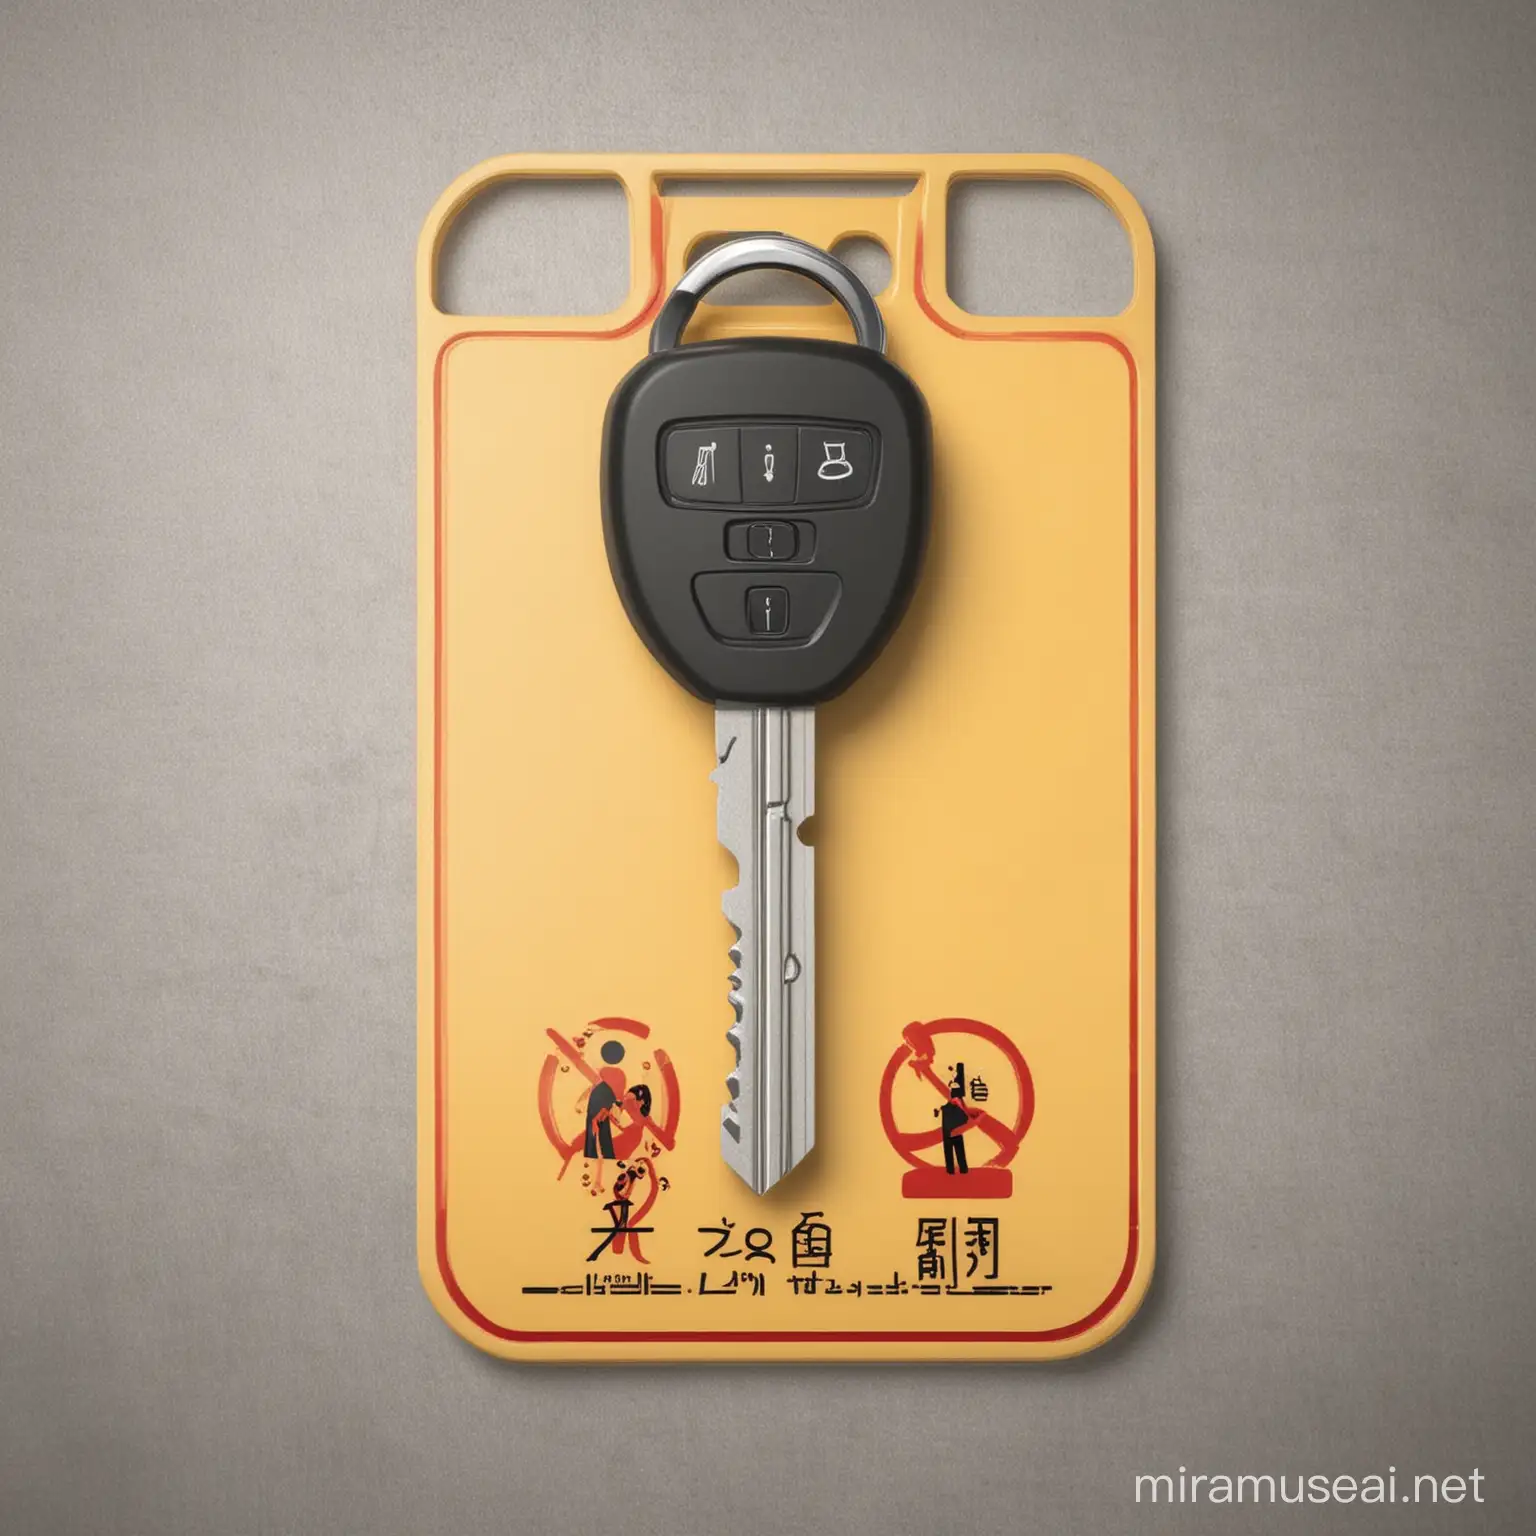 Design a car key on a flat surface and a pictogram that warns against the use of alcohol attached to the key. Attach these keys to the car key.

